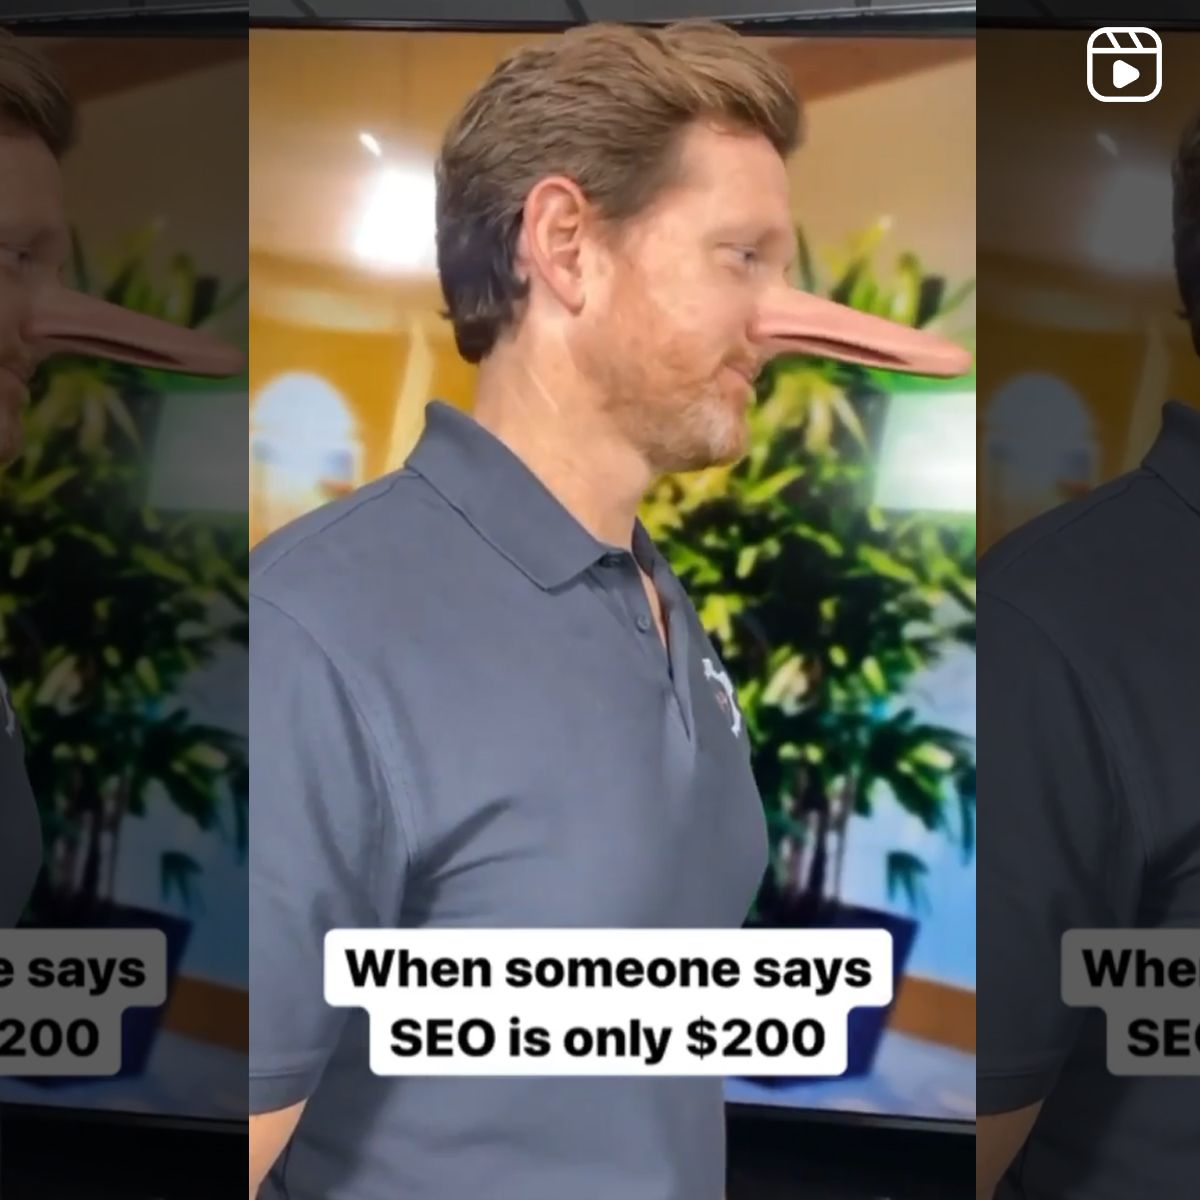 When someone says SEO is only $200